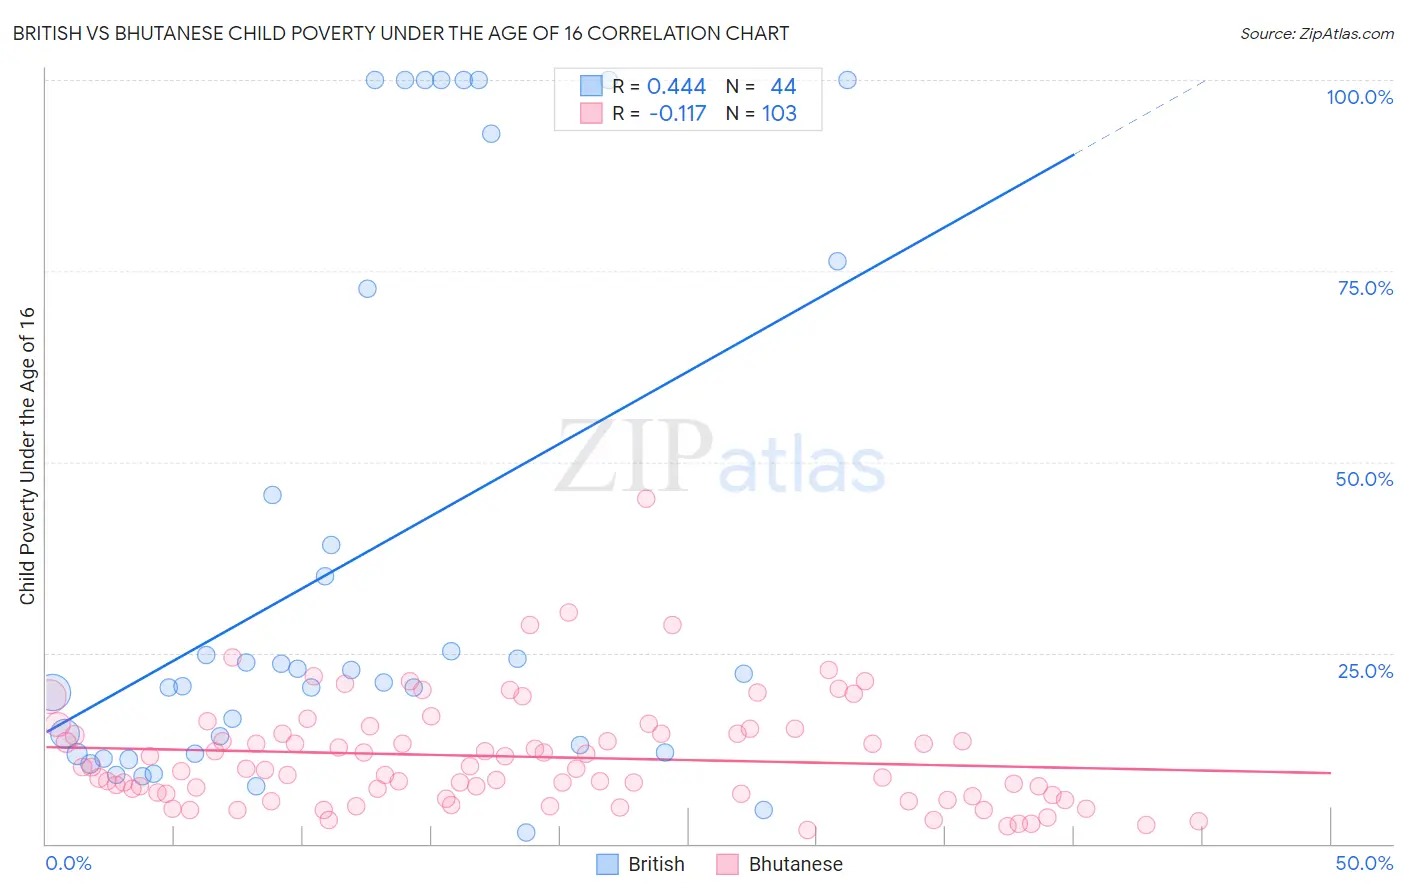 British vs Bhutanese Child Poverty Under the Age of 16